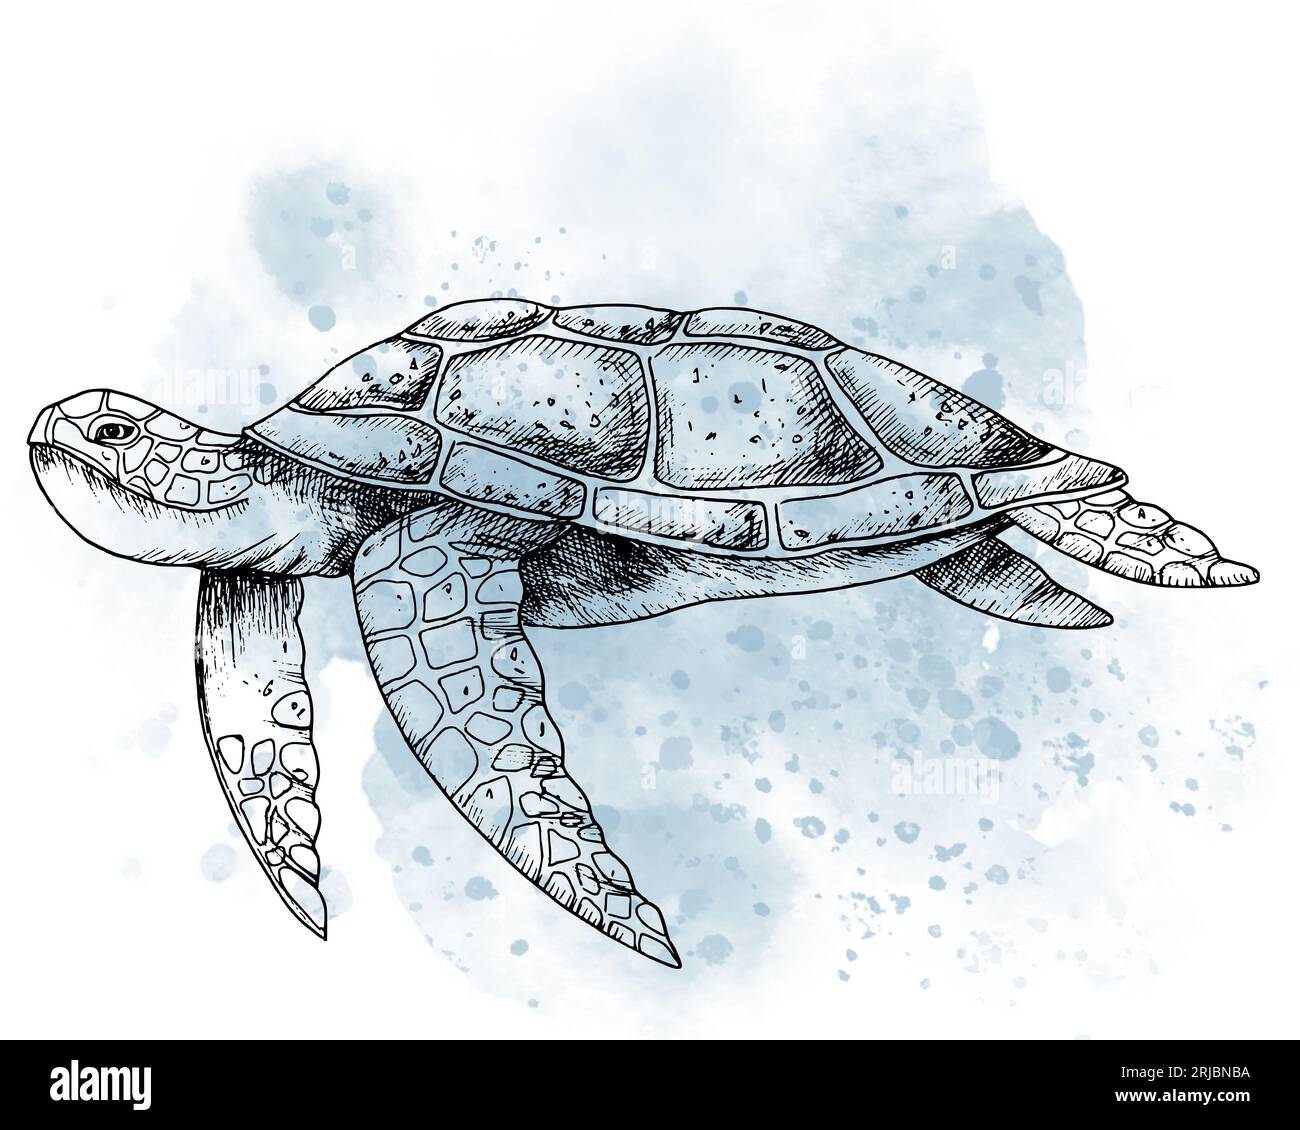 Sea Turtle with watercolor spot. Hand drawn graphic illustration of ocean Tortoise in outline style. Linear engraving of underwater animal painted by black inks. Marine sketch for icon or logo. Stock Photo